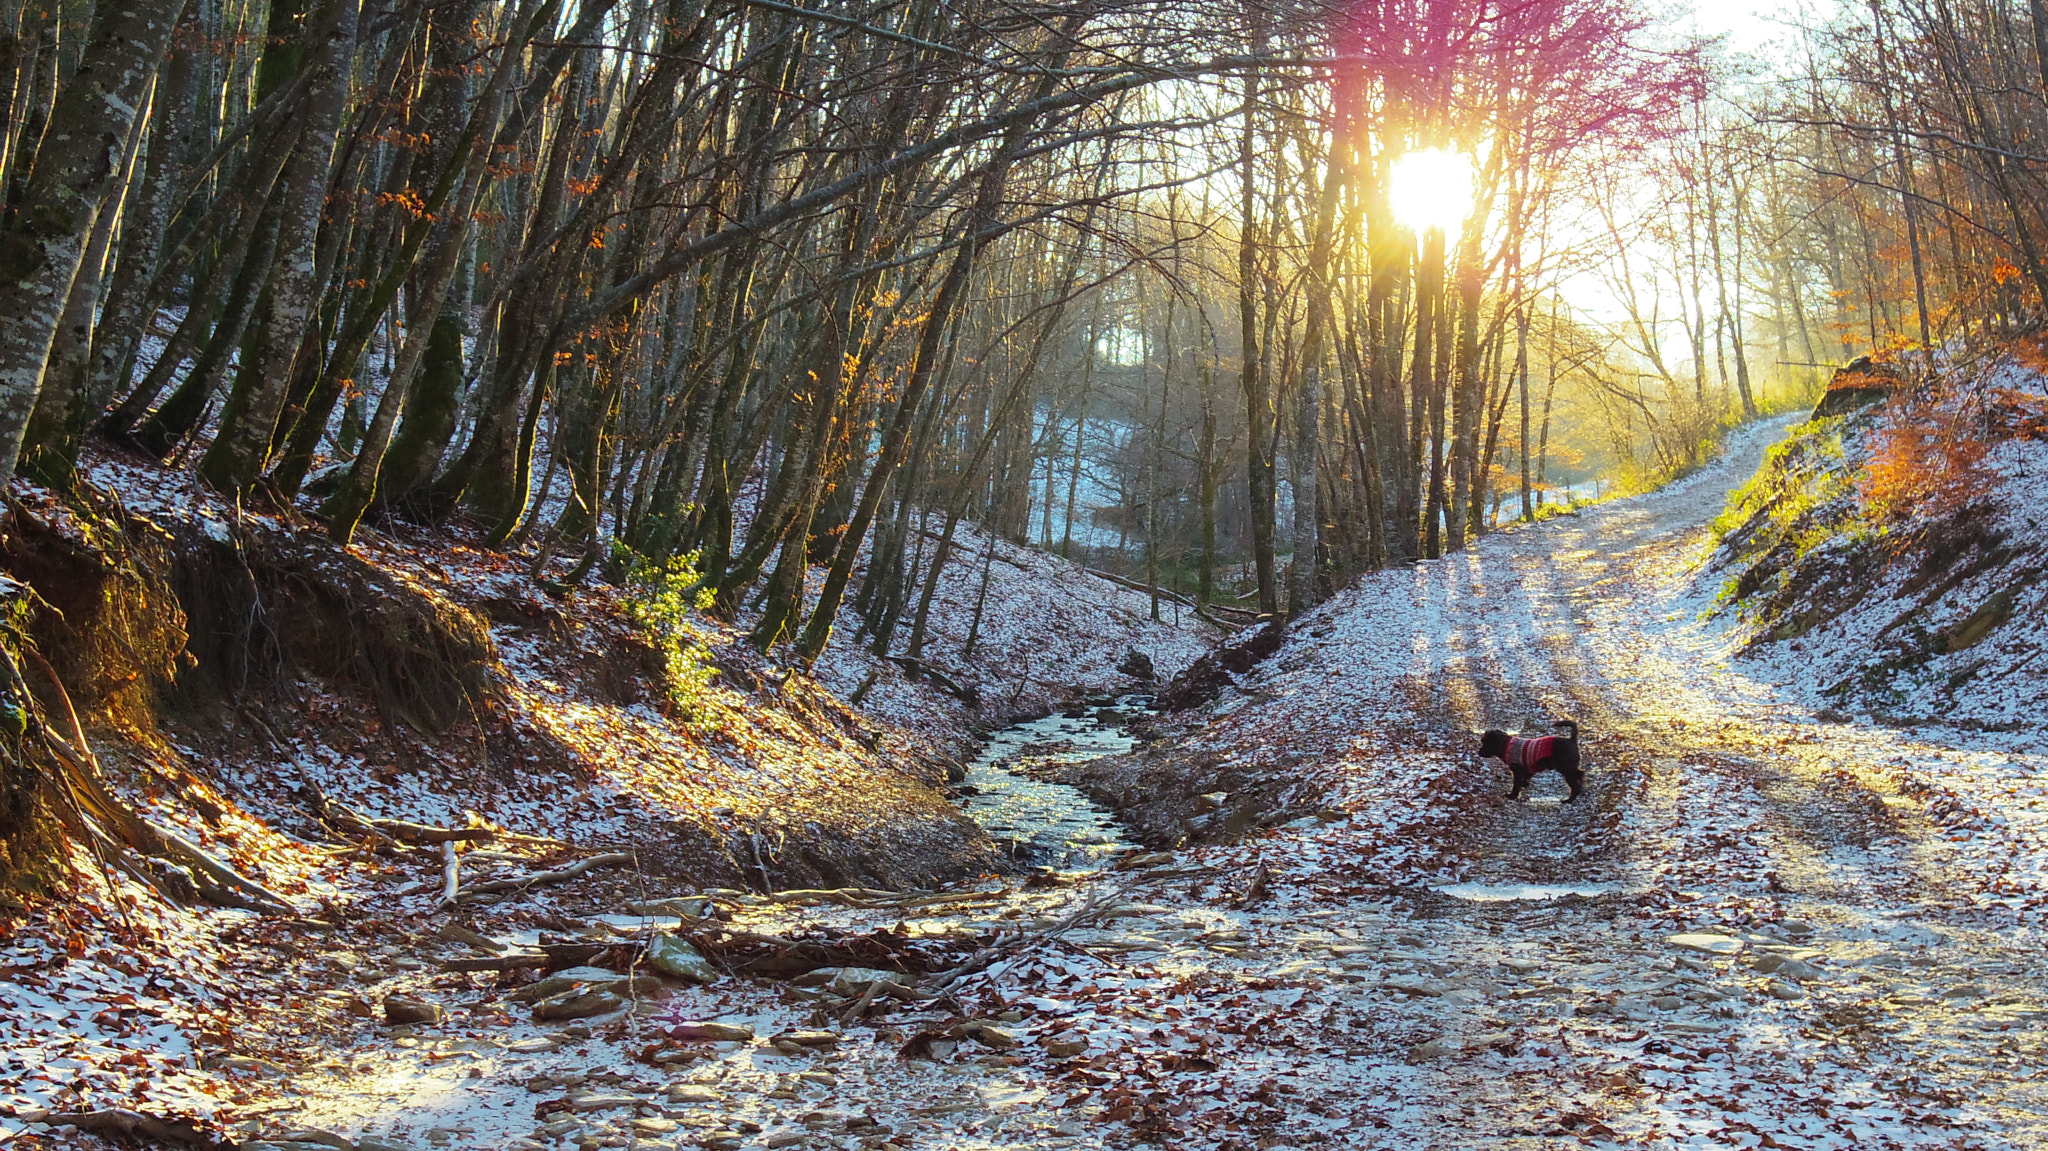 Pentax Q sample photo. Winter sunrise in a chestnut forest in the auvergne, france photography